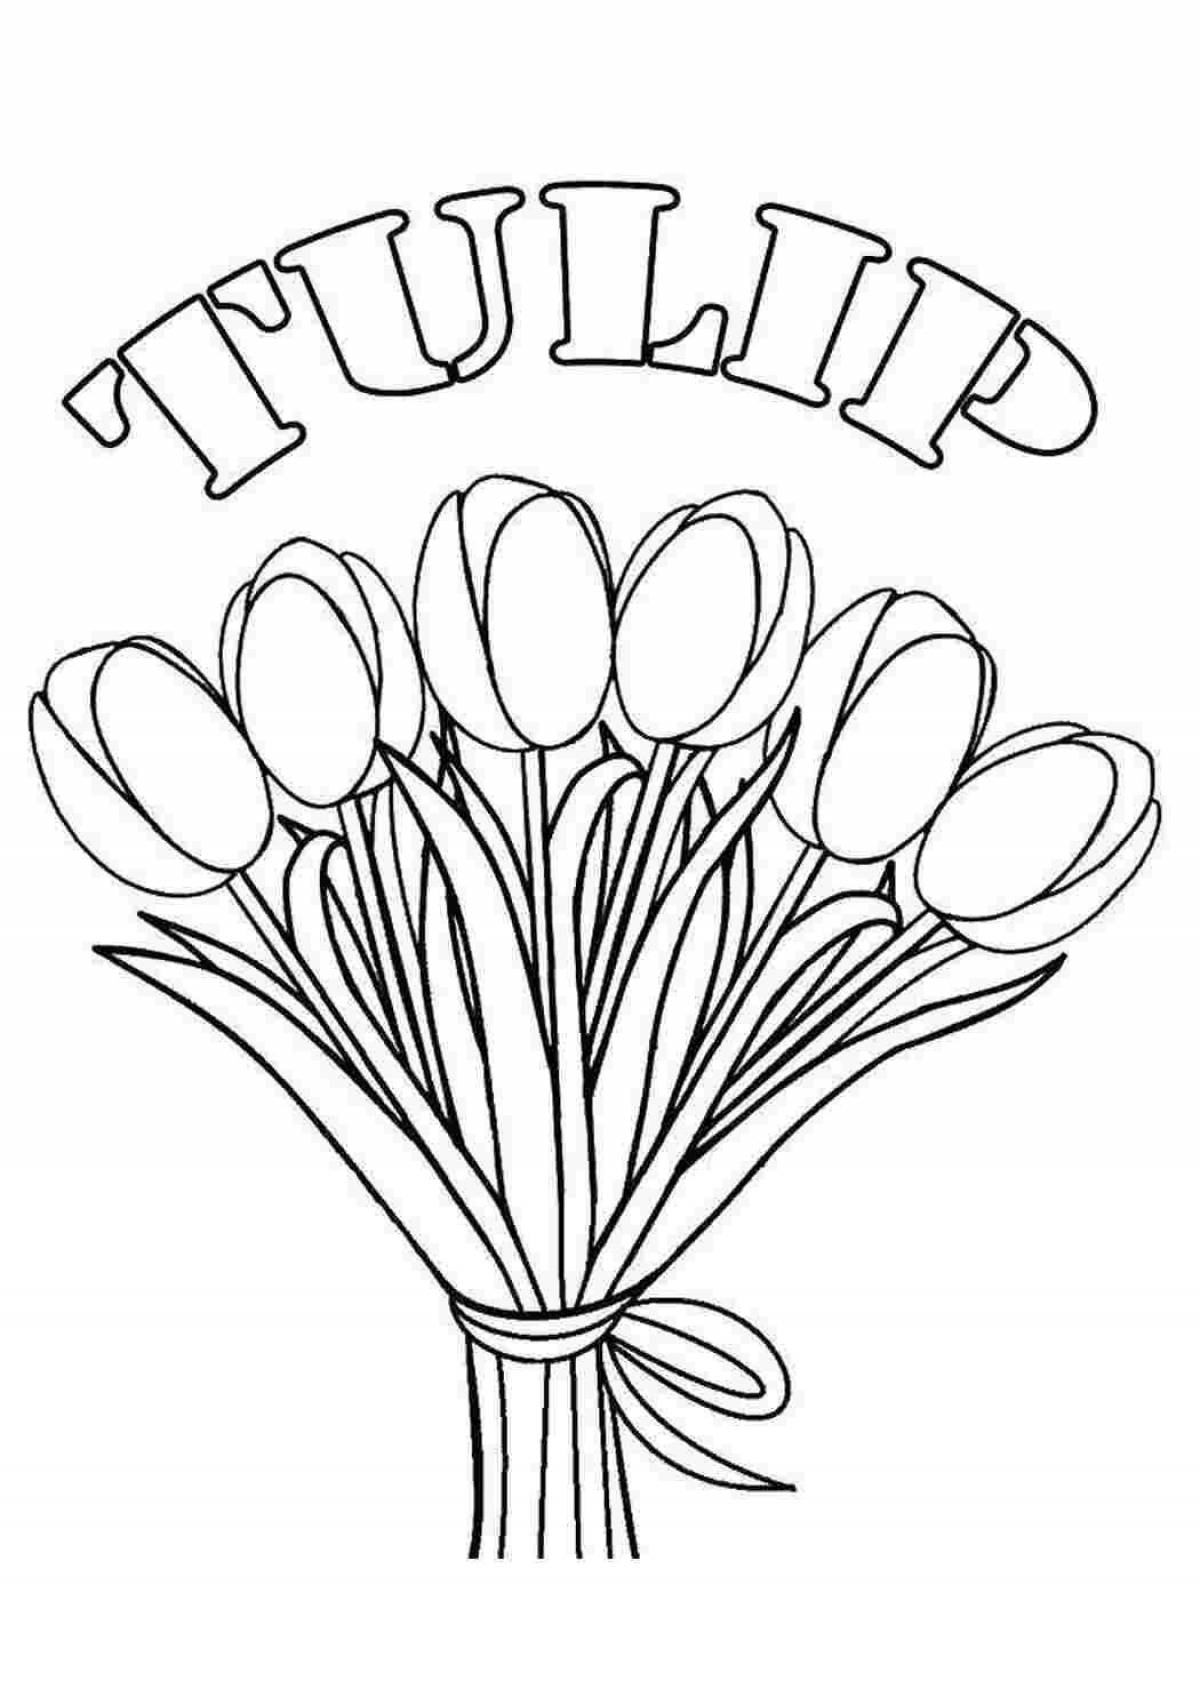 Coloring page joyful tulips for March 8